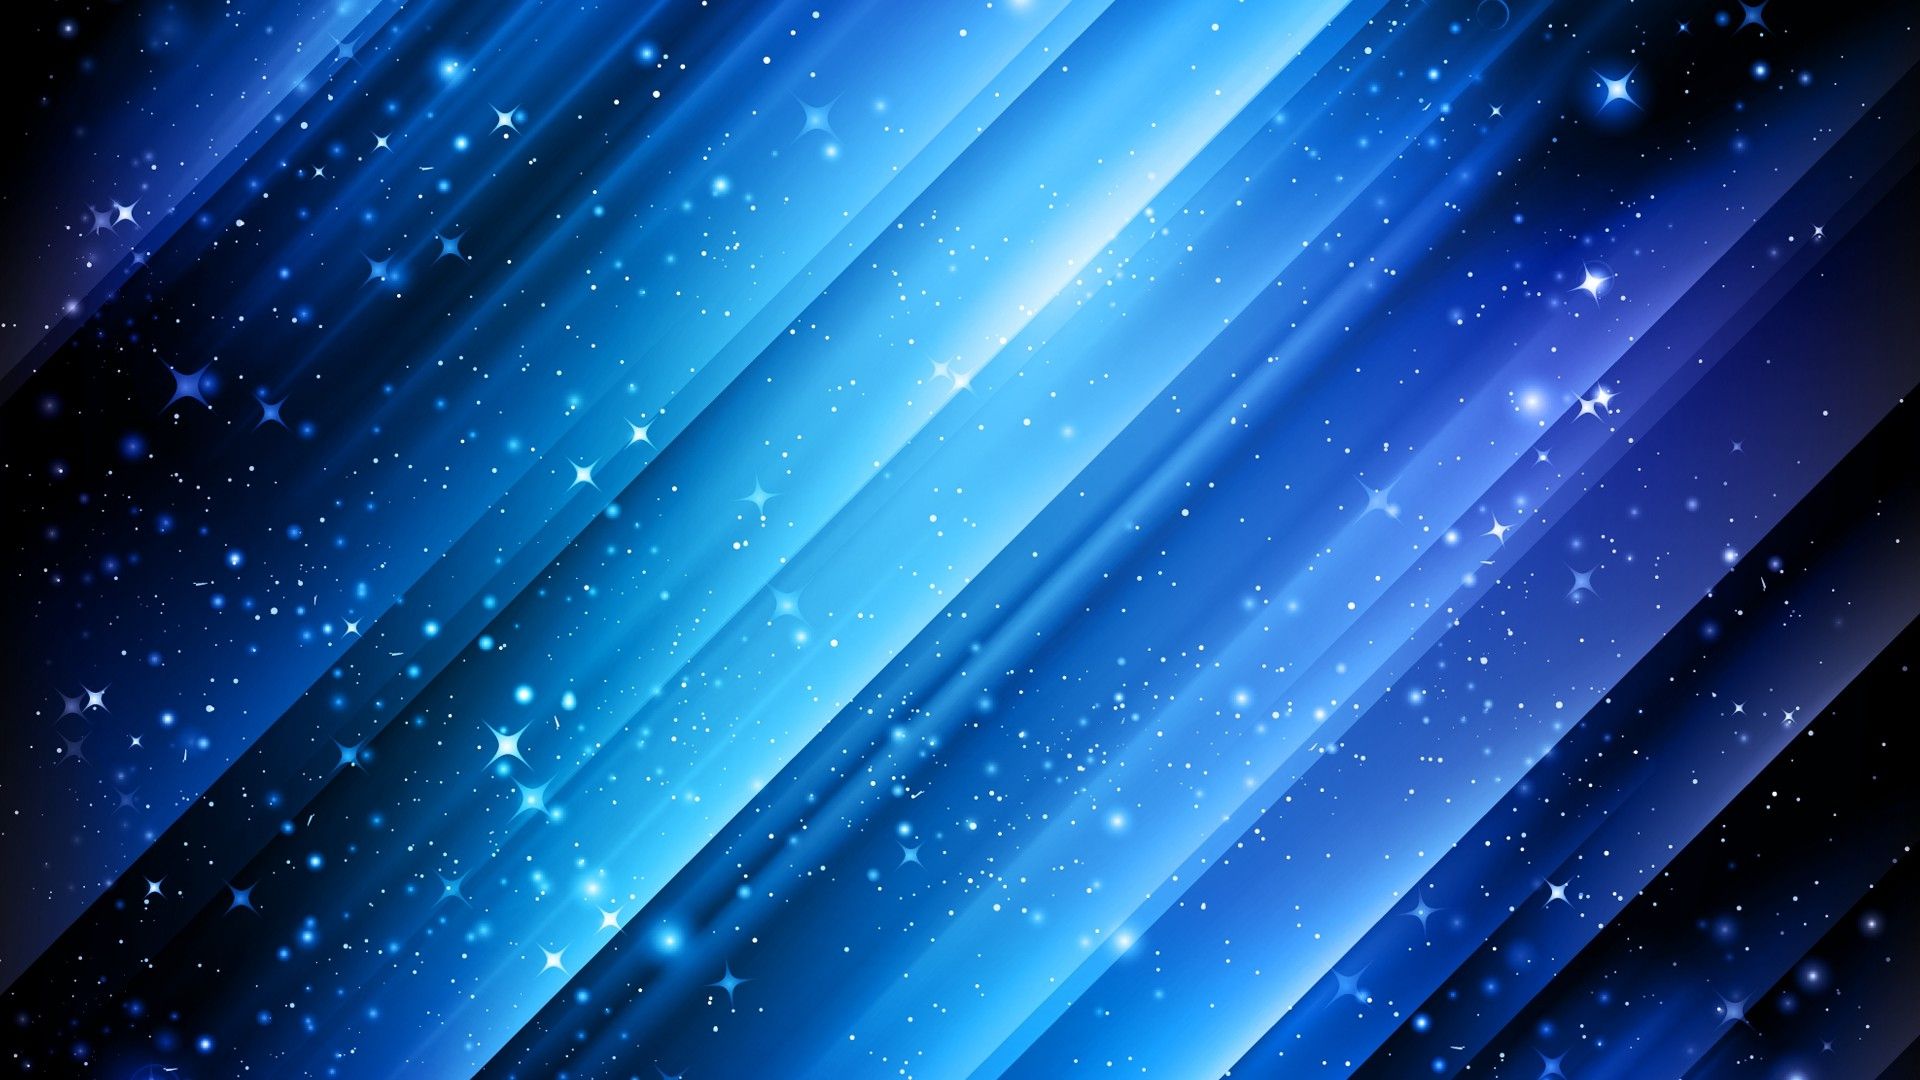 Blue Lines Abstract Wallpapers - Wallpaper Cave